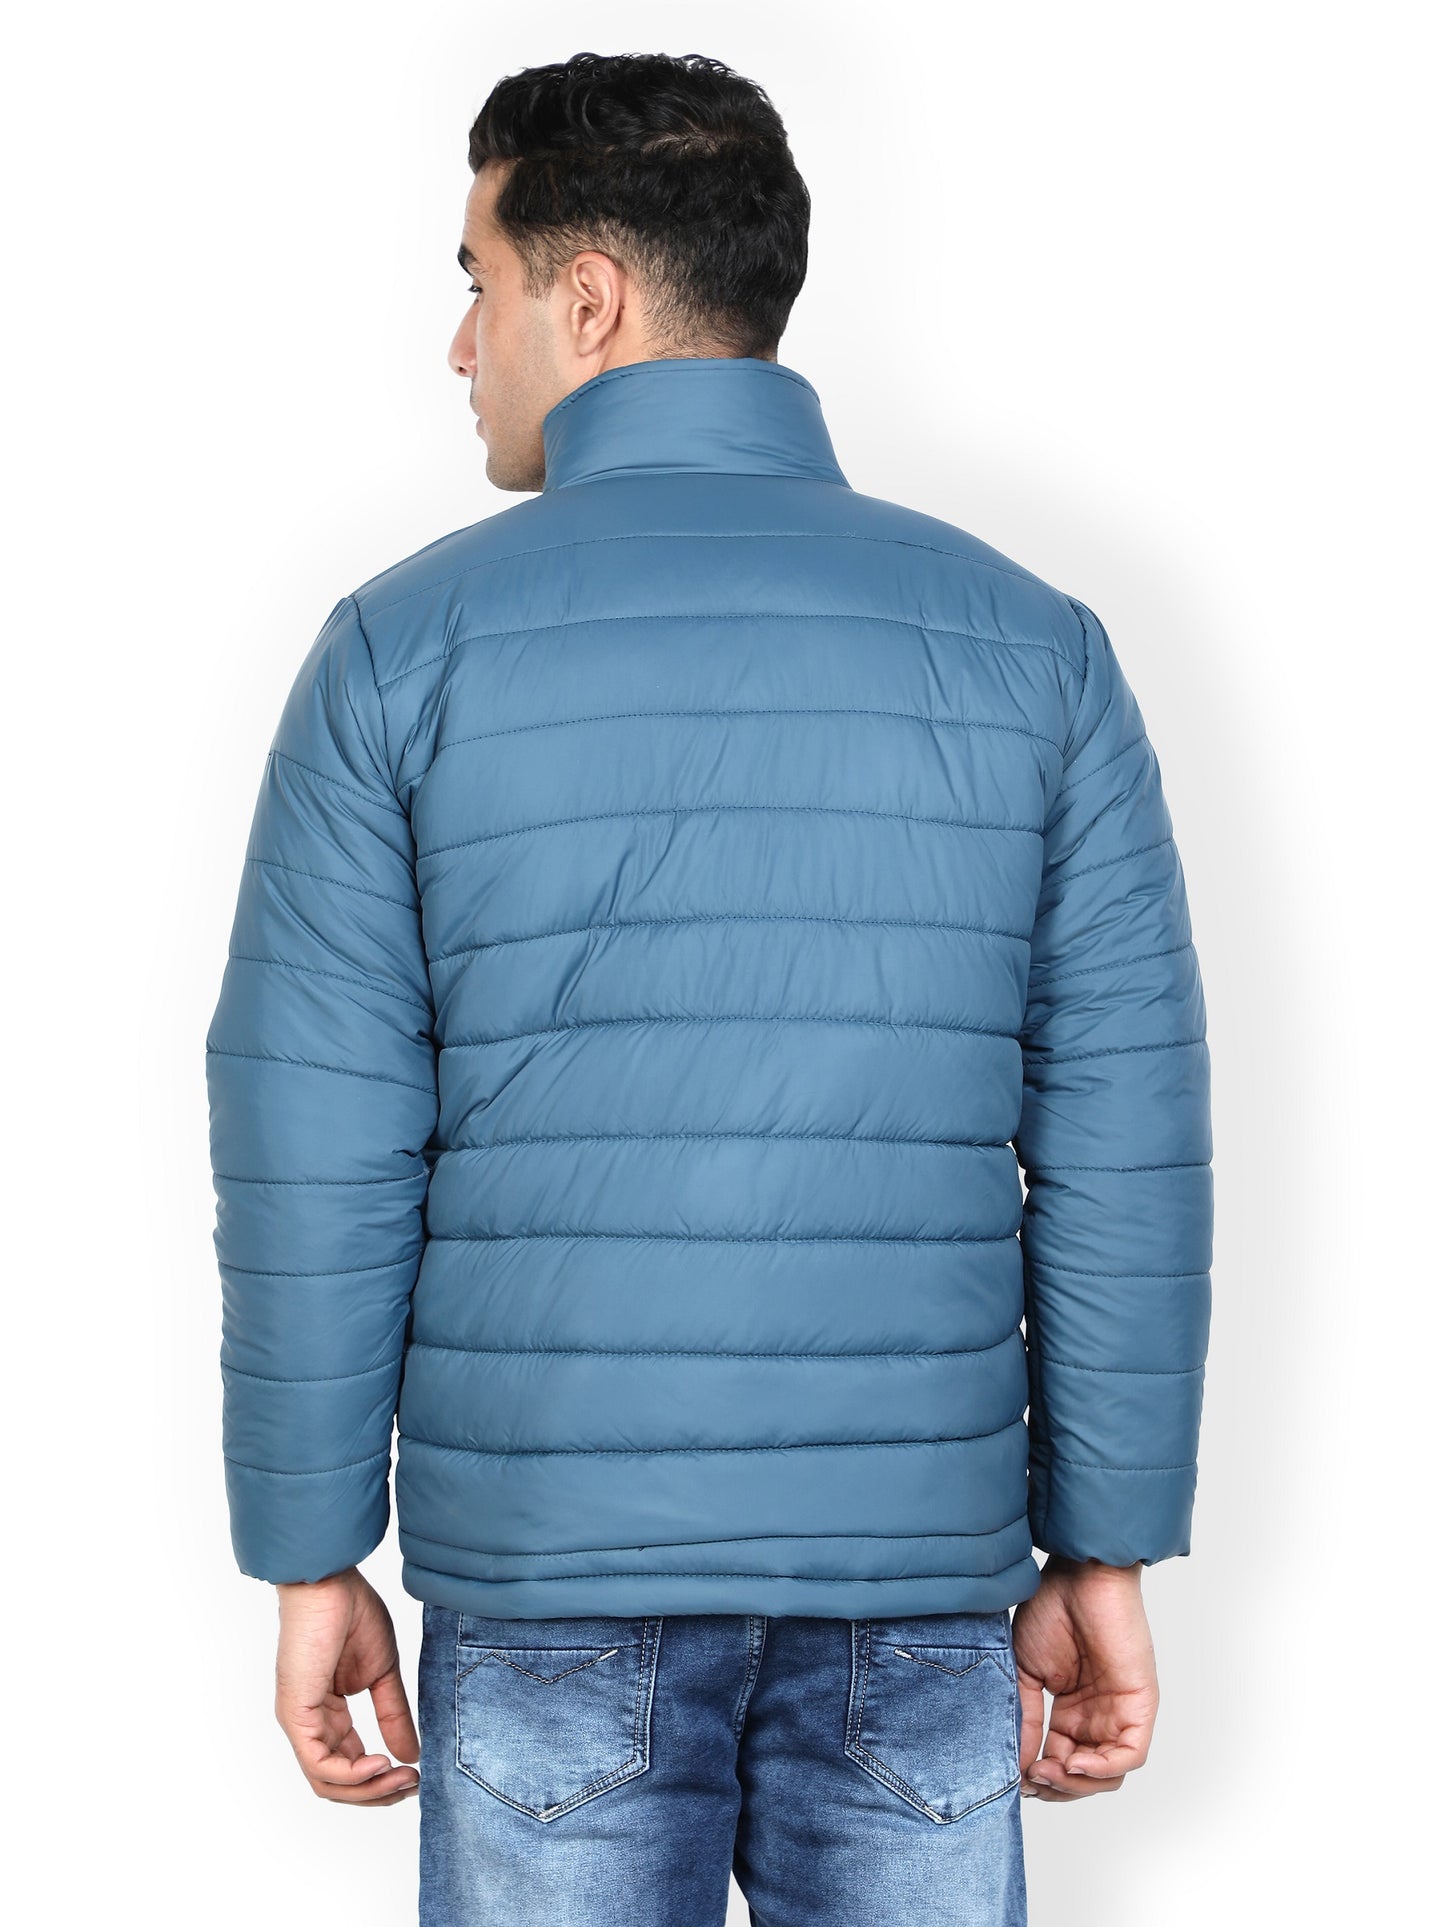 NUEVOSPORTA Men's Winter Solid Teal Quilted Puffer jacket